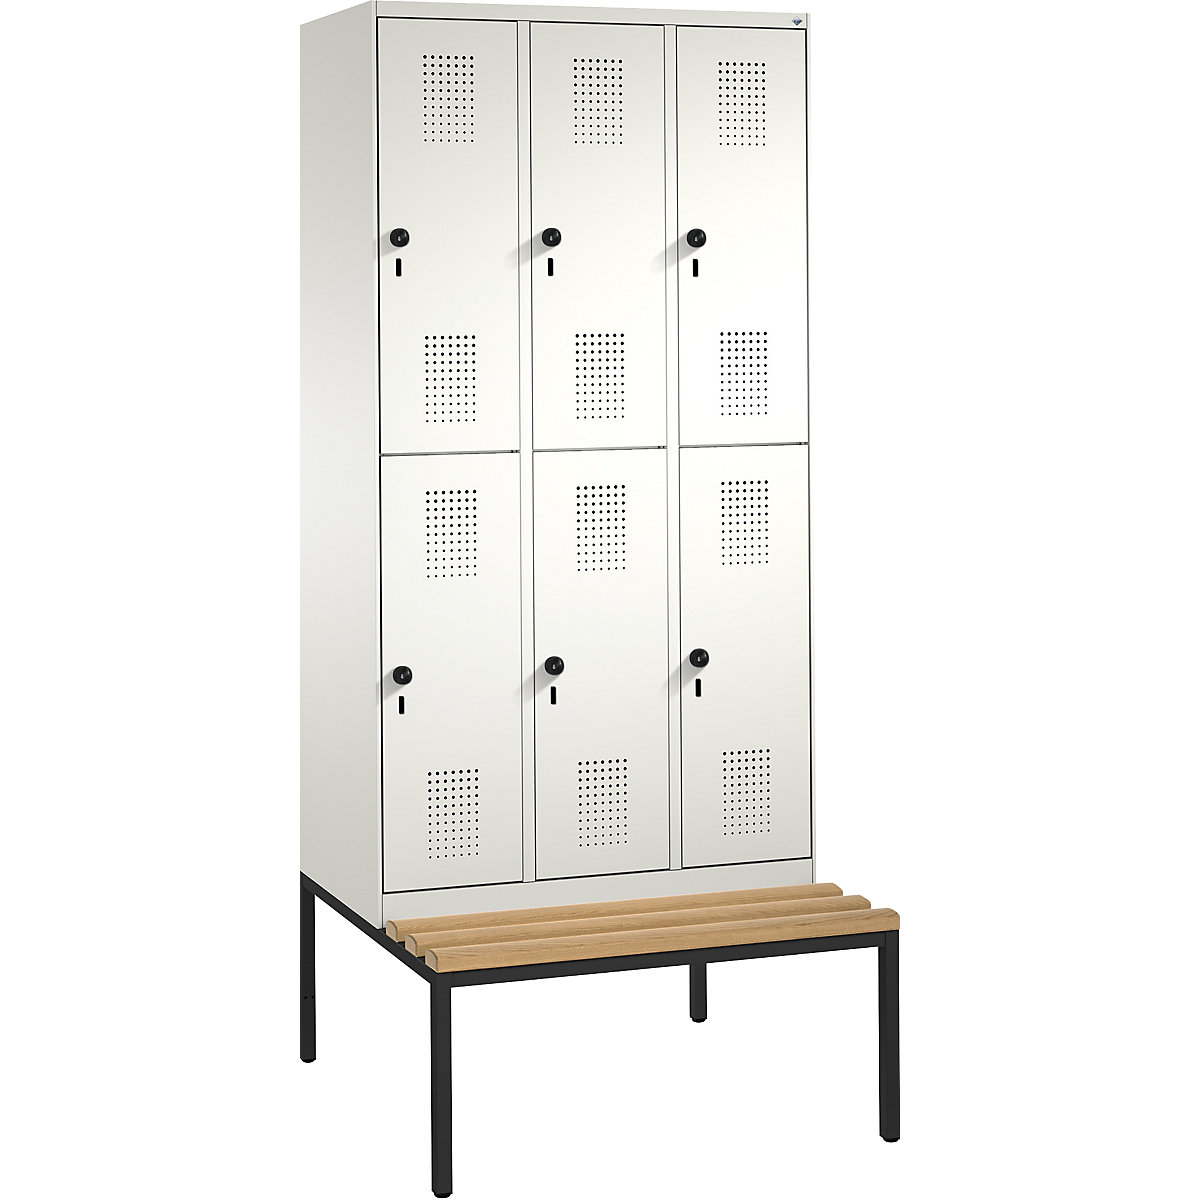 EVOLO cloakroom locker, double tier, with bench – C+P, 3 compartments, 2 shelf compartments each, compartment width 300 mm, pure white / pure white-13